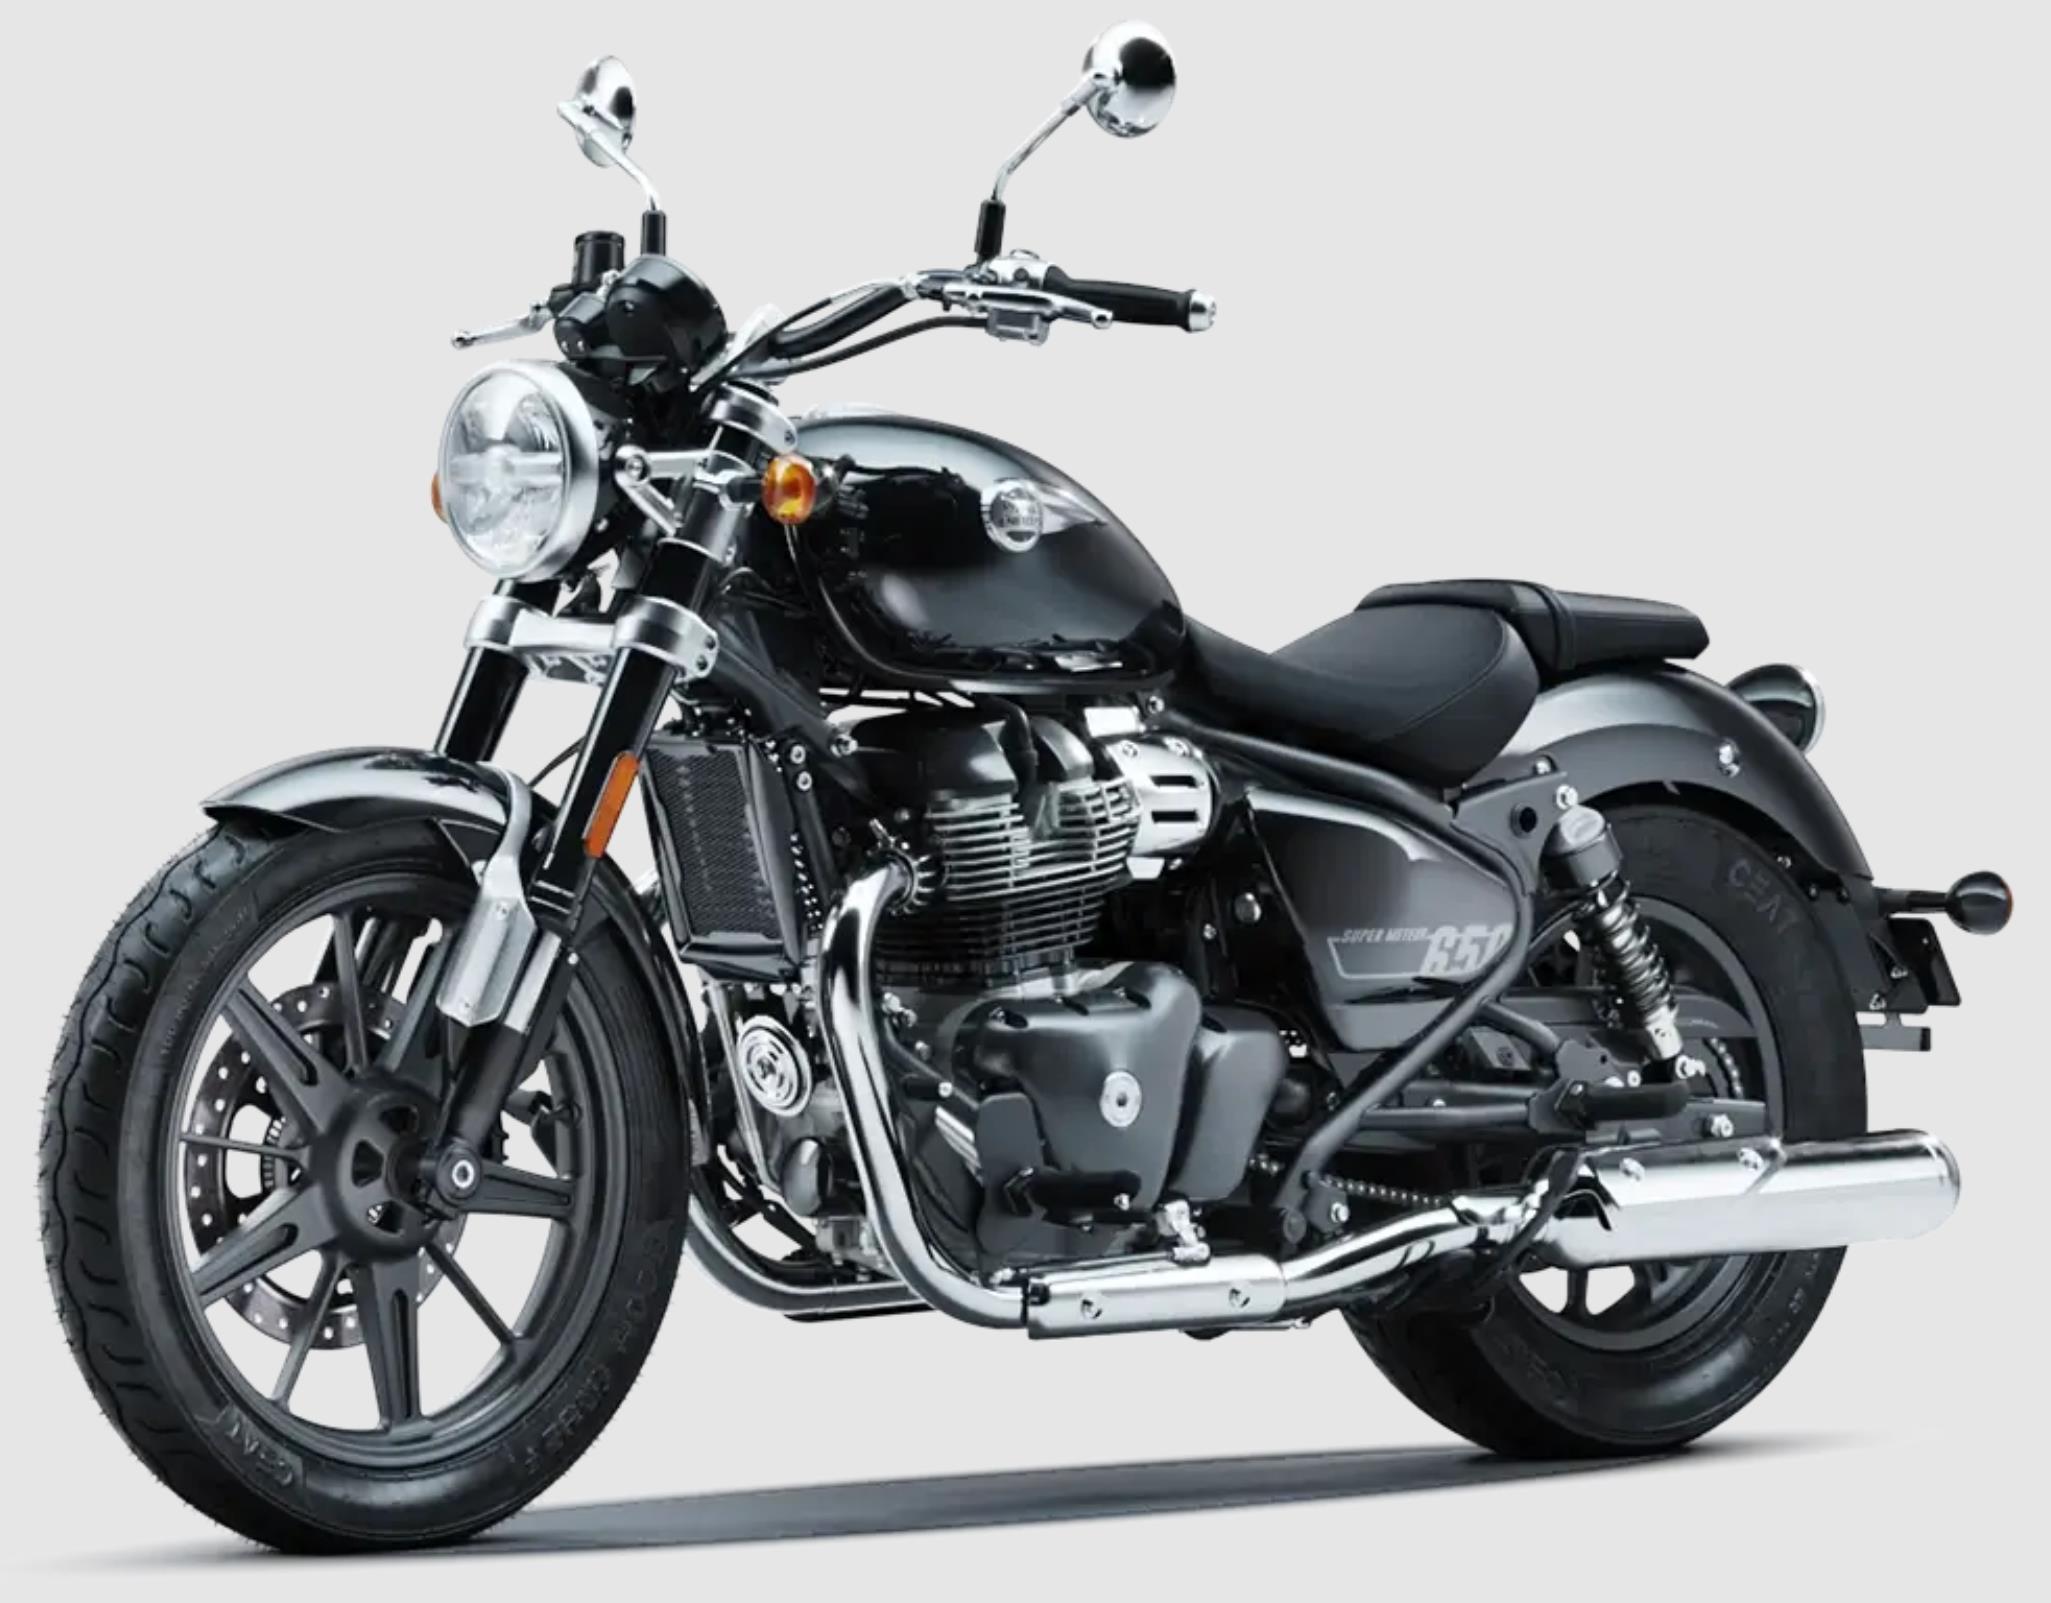 Royal Enfield Super Meteor 650 Astral Price, Specs, Top Speed & Mileage